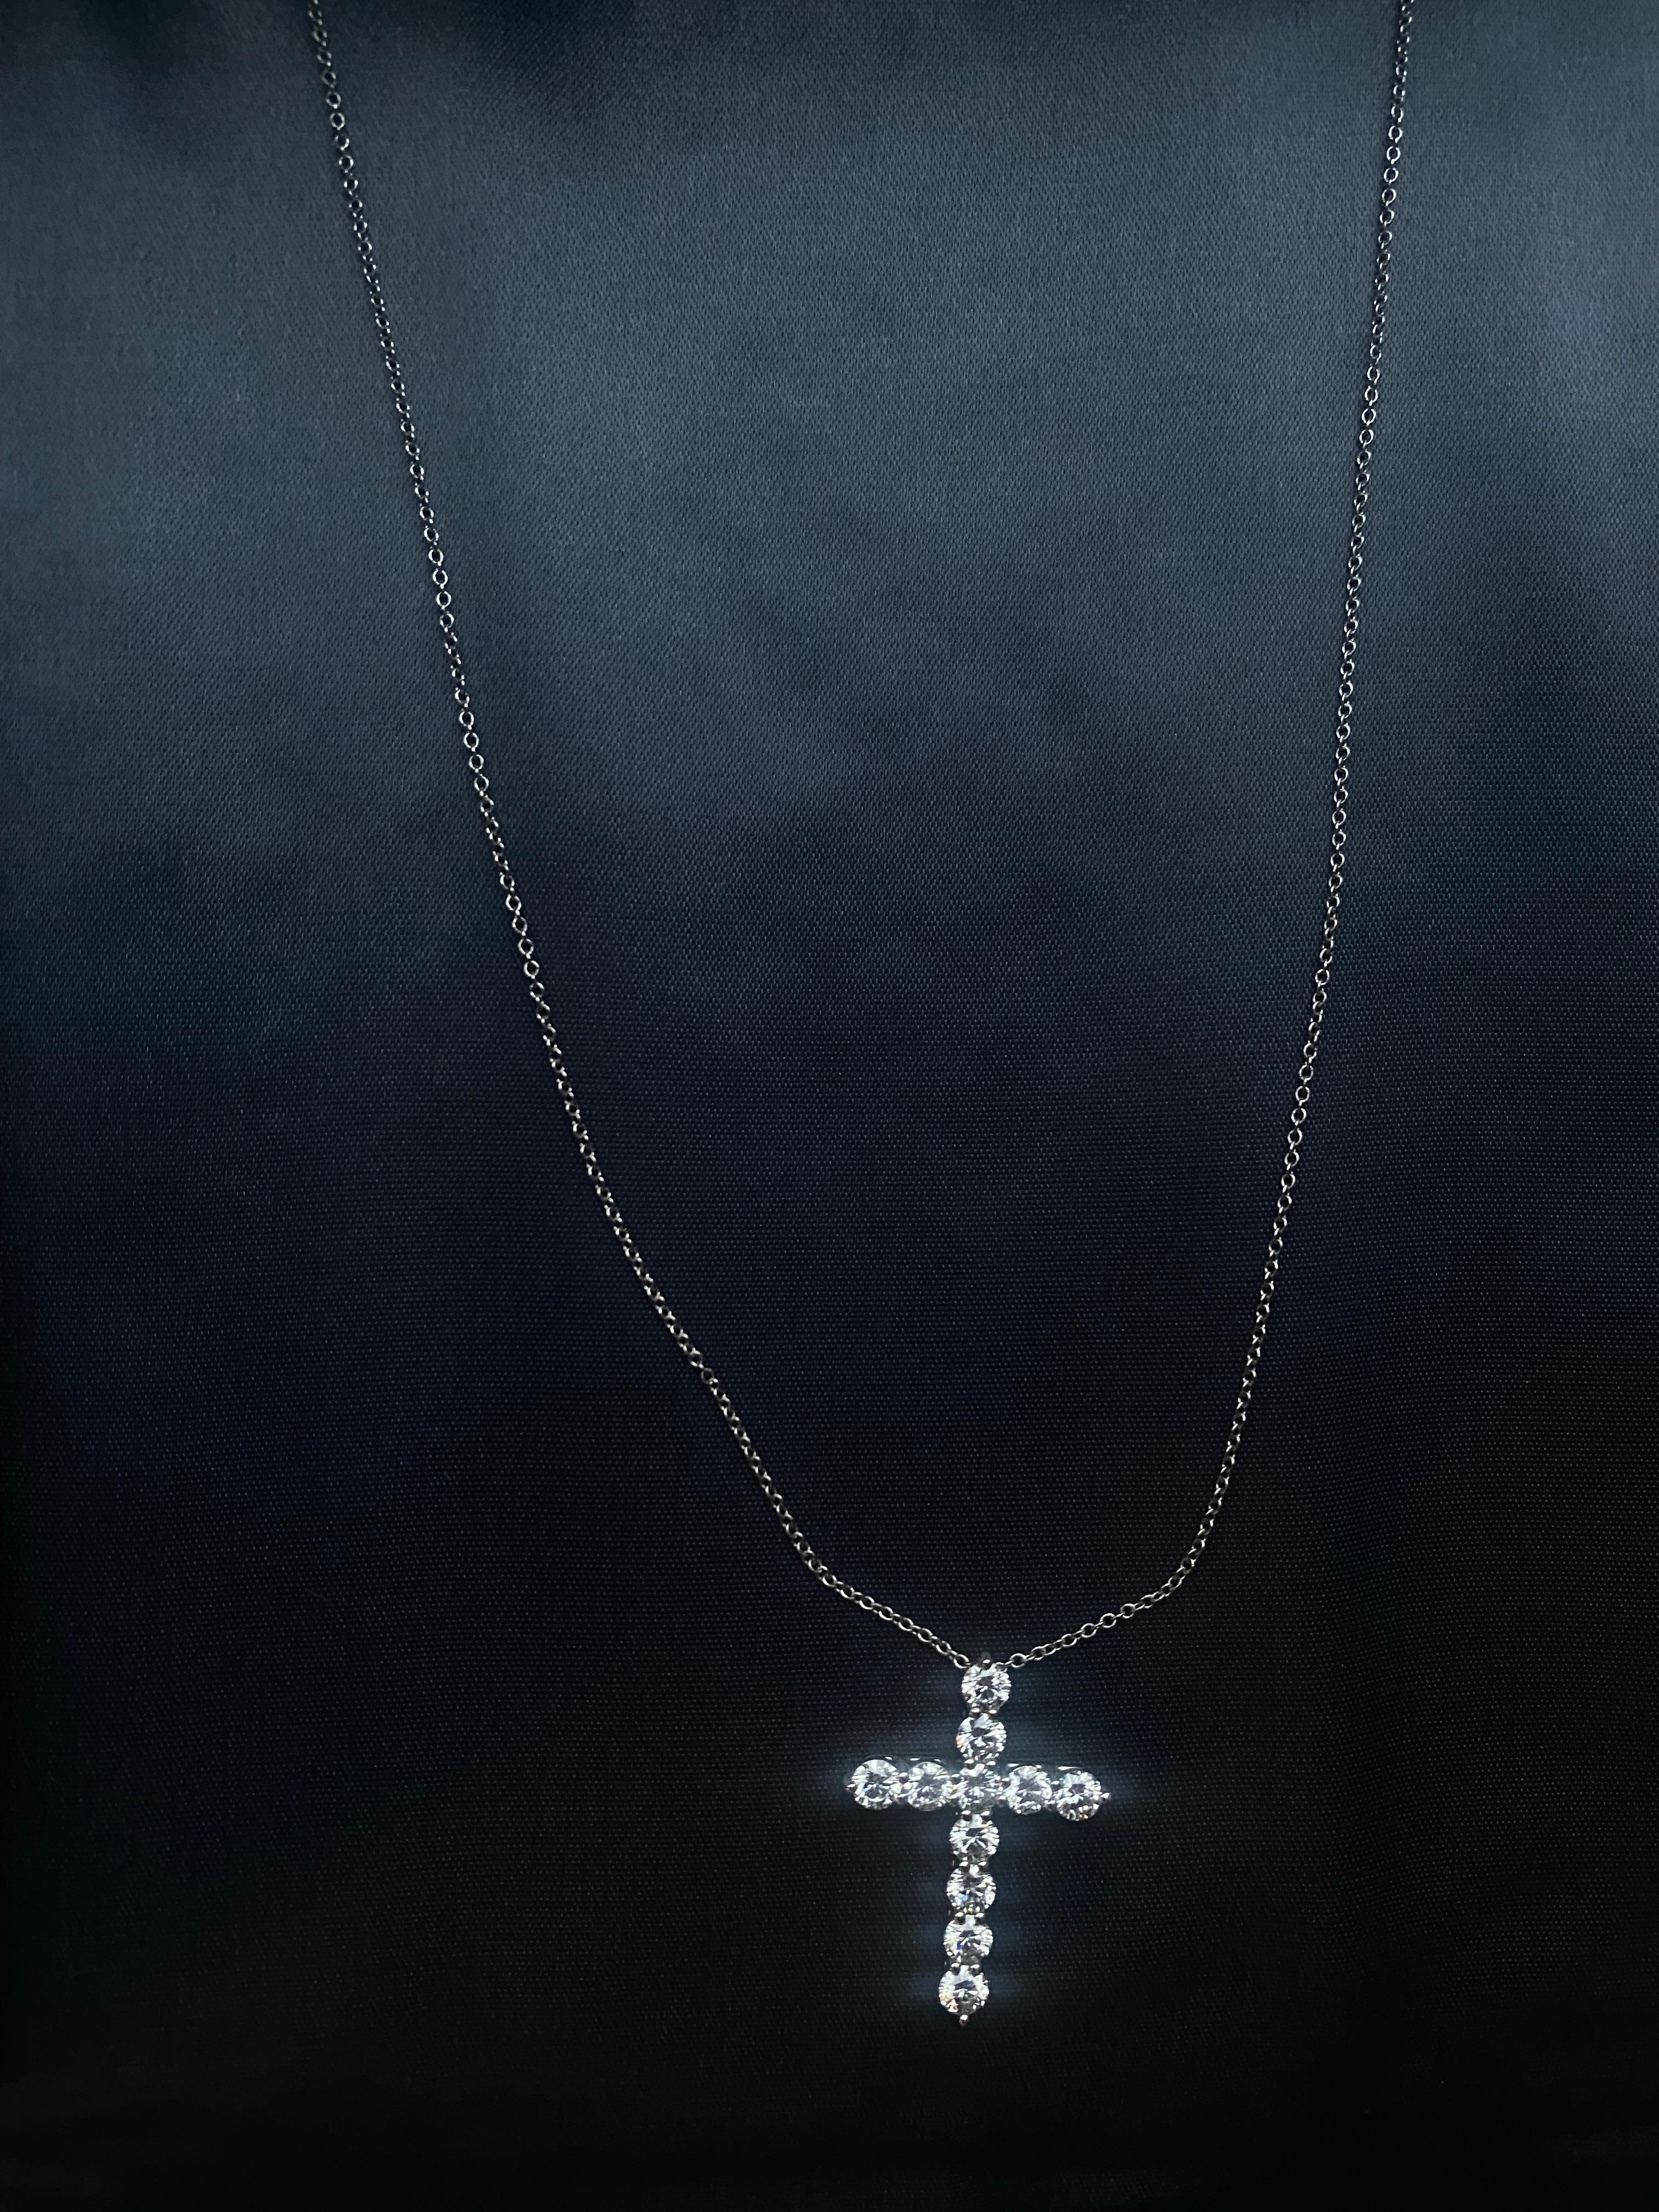 Tiffany Co Large Diamond Cross 
16 inches long platinum chain 
Carat weight: 1.71
Condition: excellent, was polished at Tiffany recently ( receipt provided) 
Comes with: inner tiffany blue leather box, outer box 

Buy preowned luxury goods at Golden